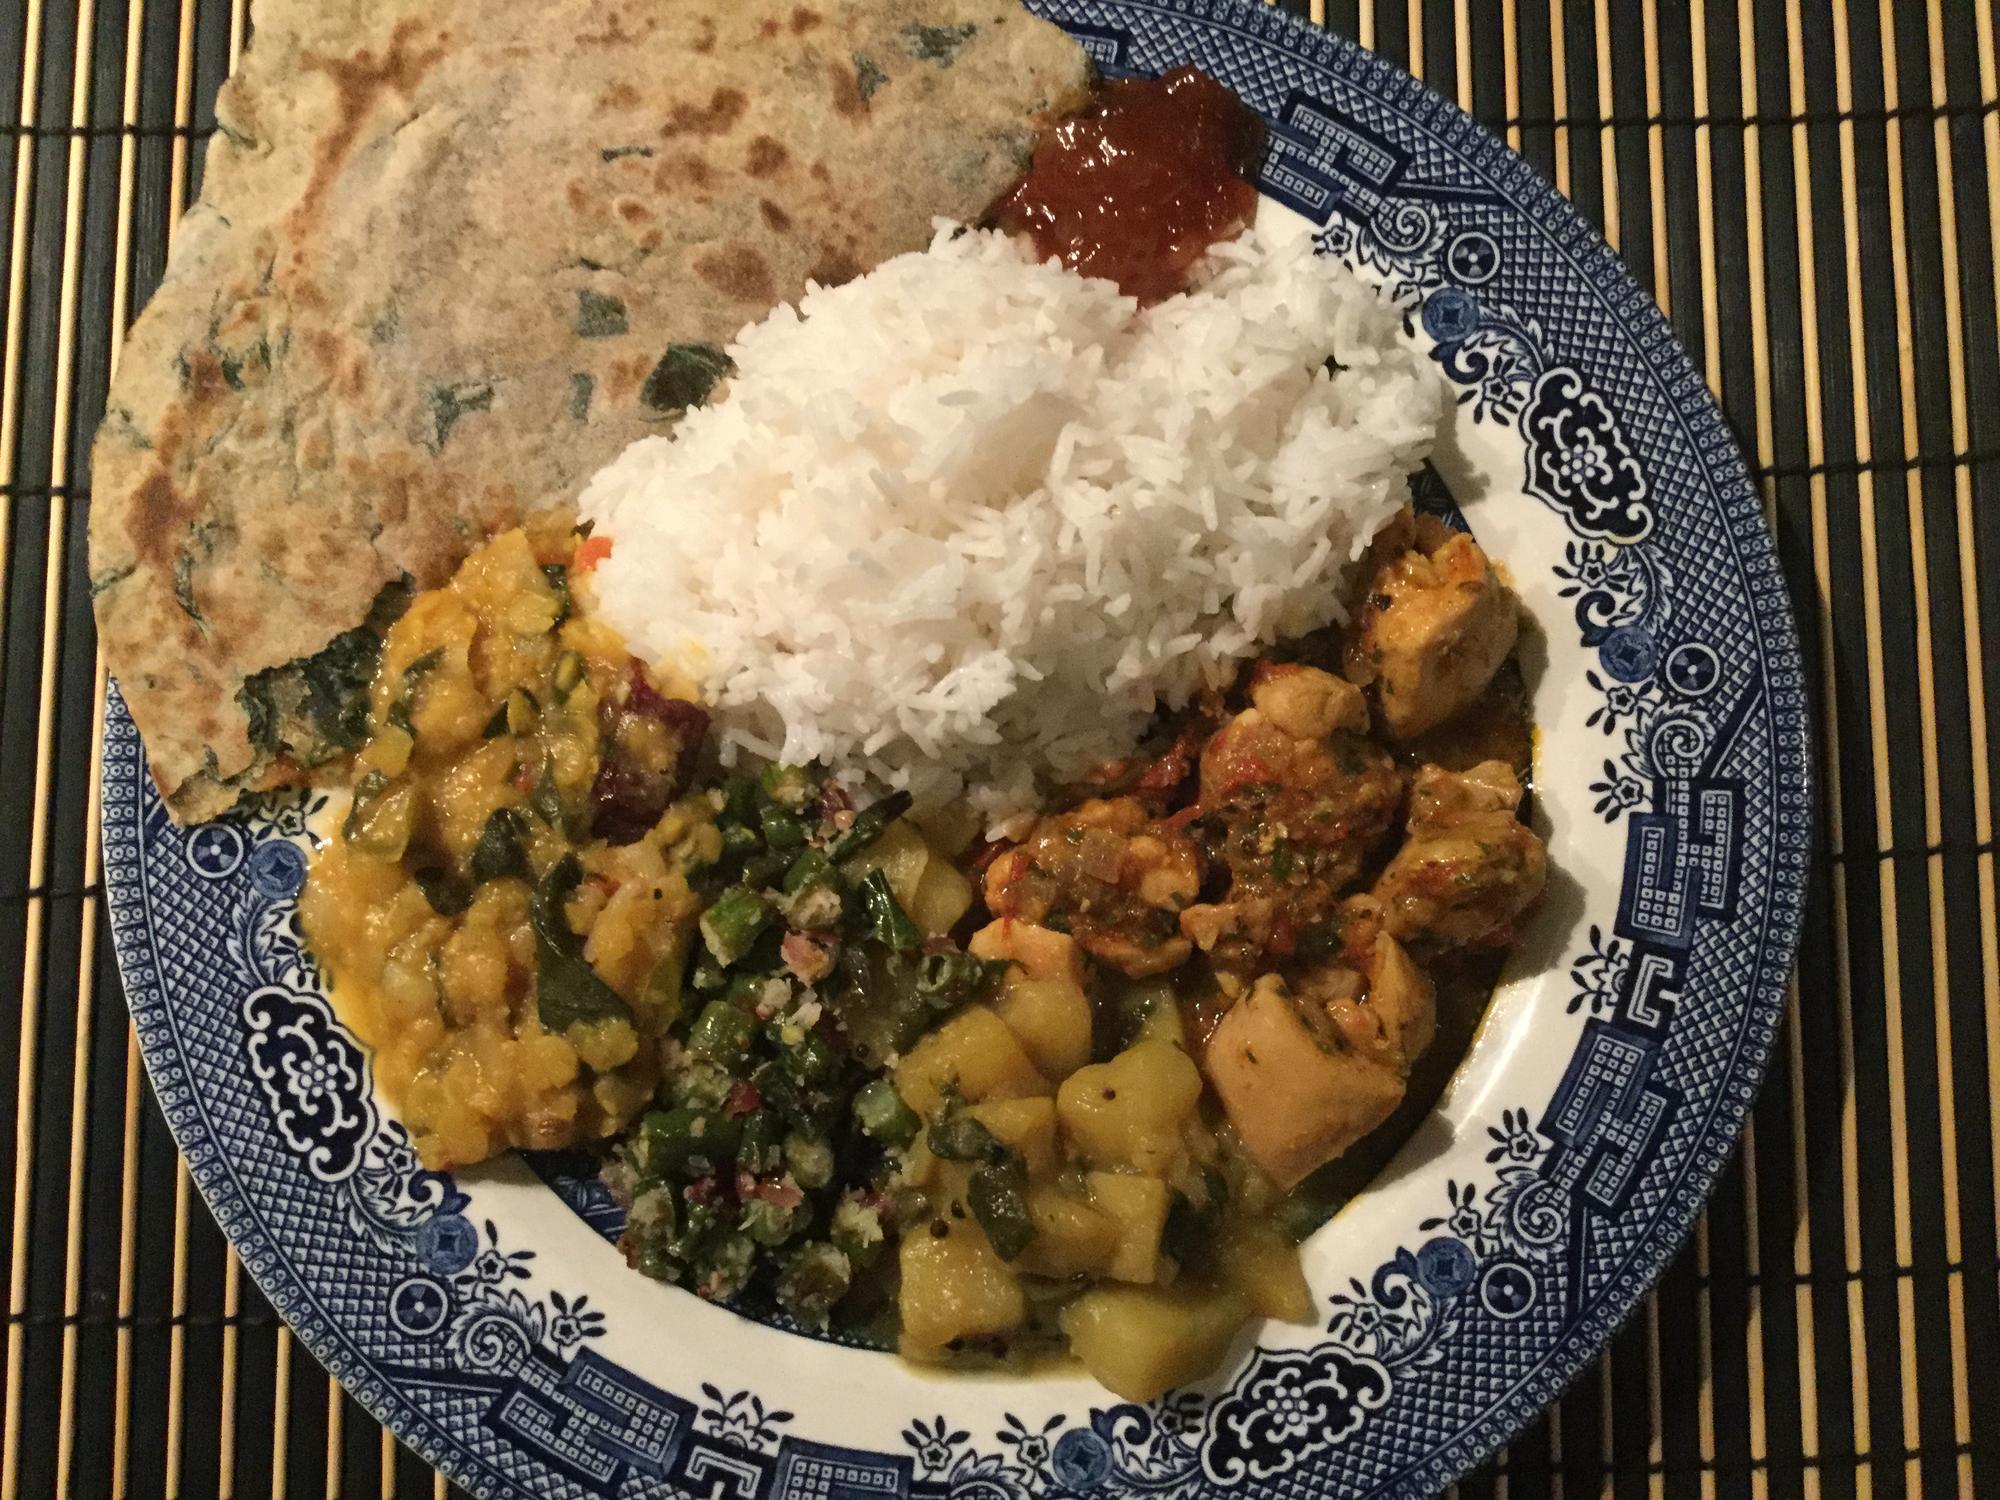 Post in eG Cook-Off #80: The Aromatic, Exotic Flavors of Curry